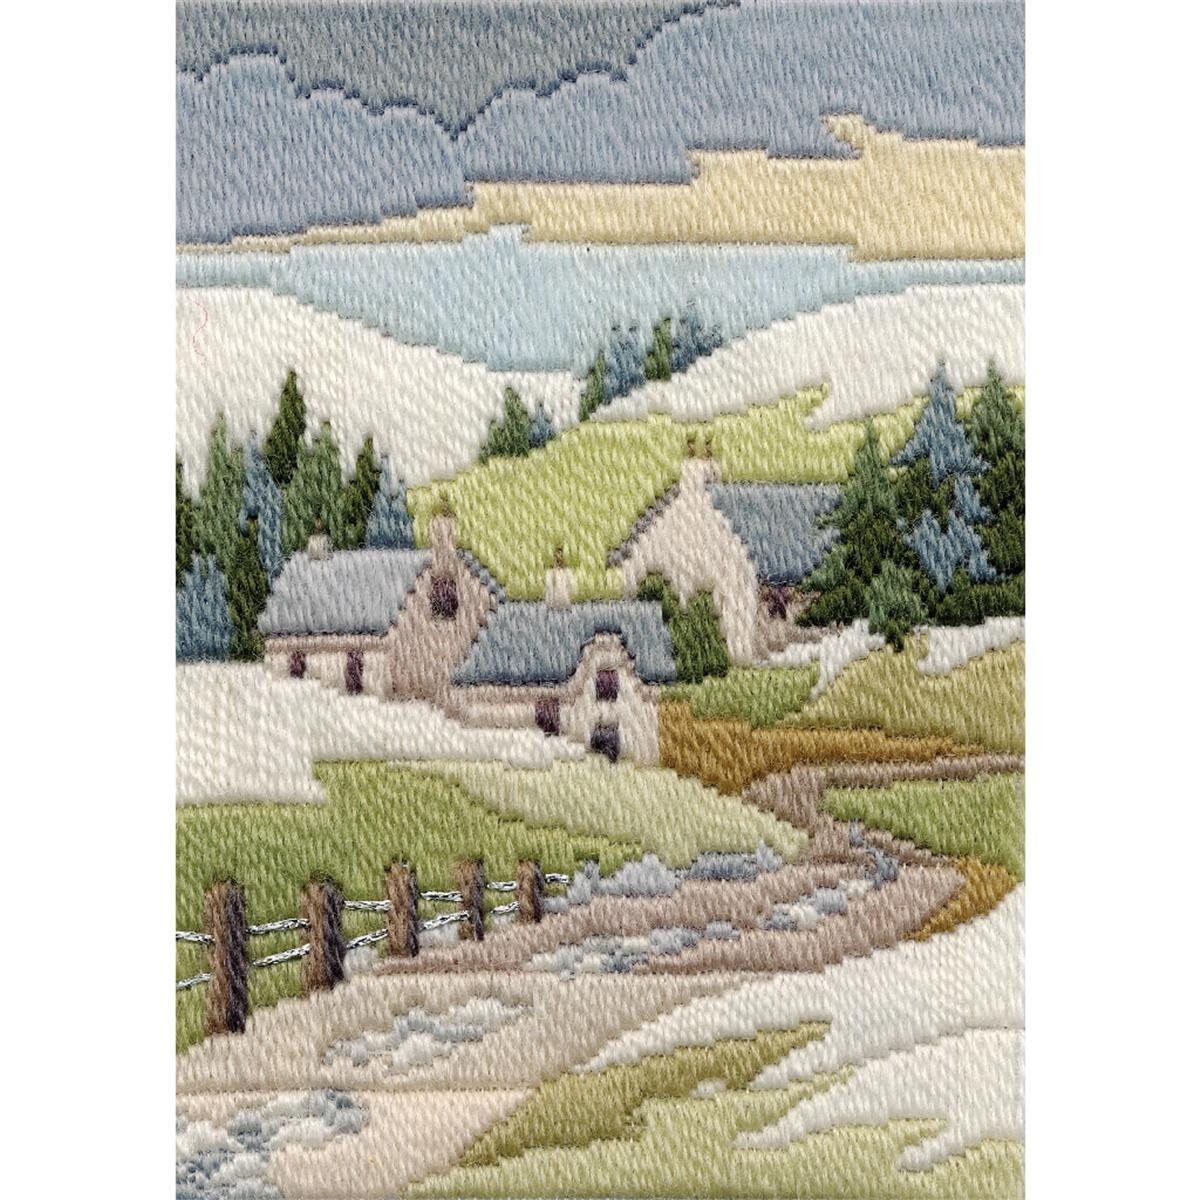 A detailed Bothy Threads embroidery pack shows a tranquil...